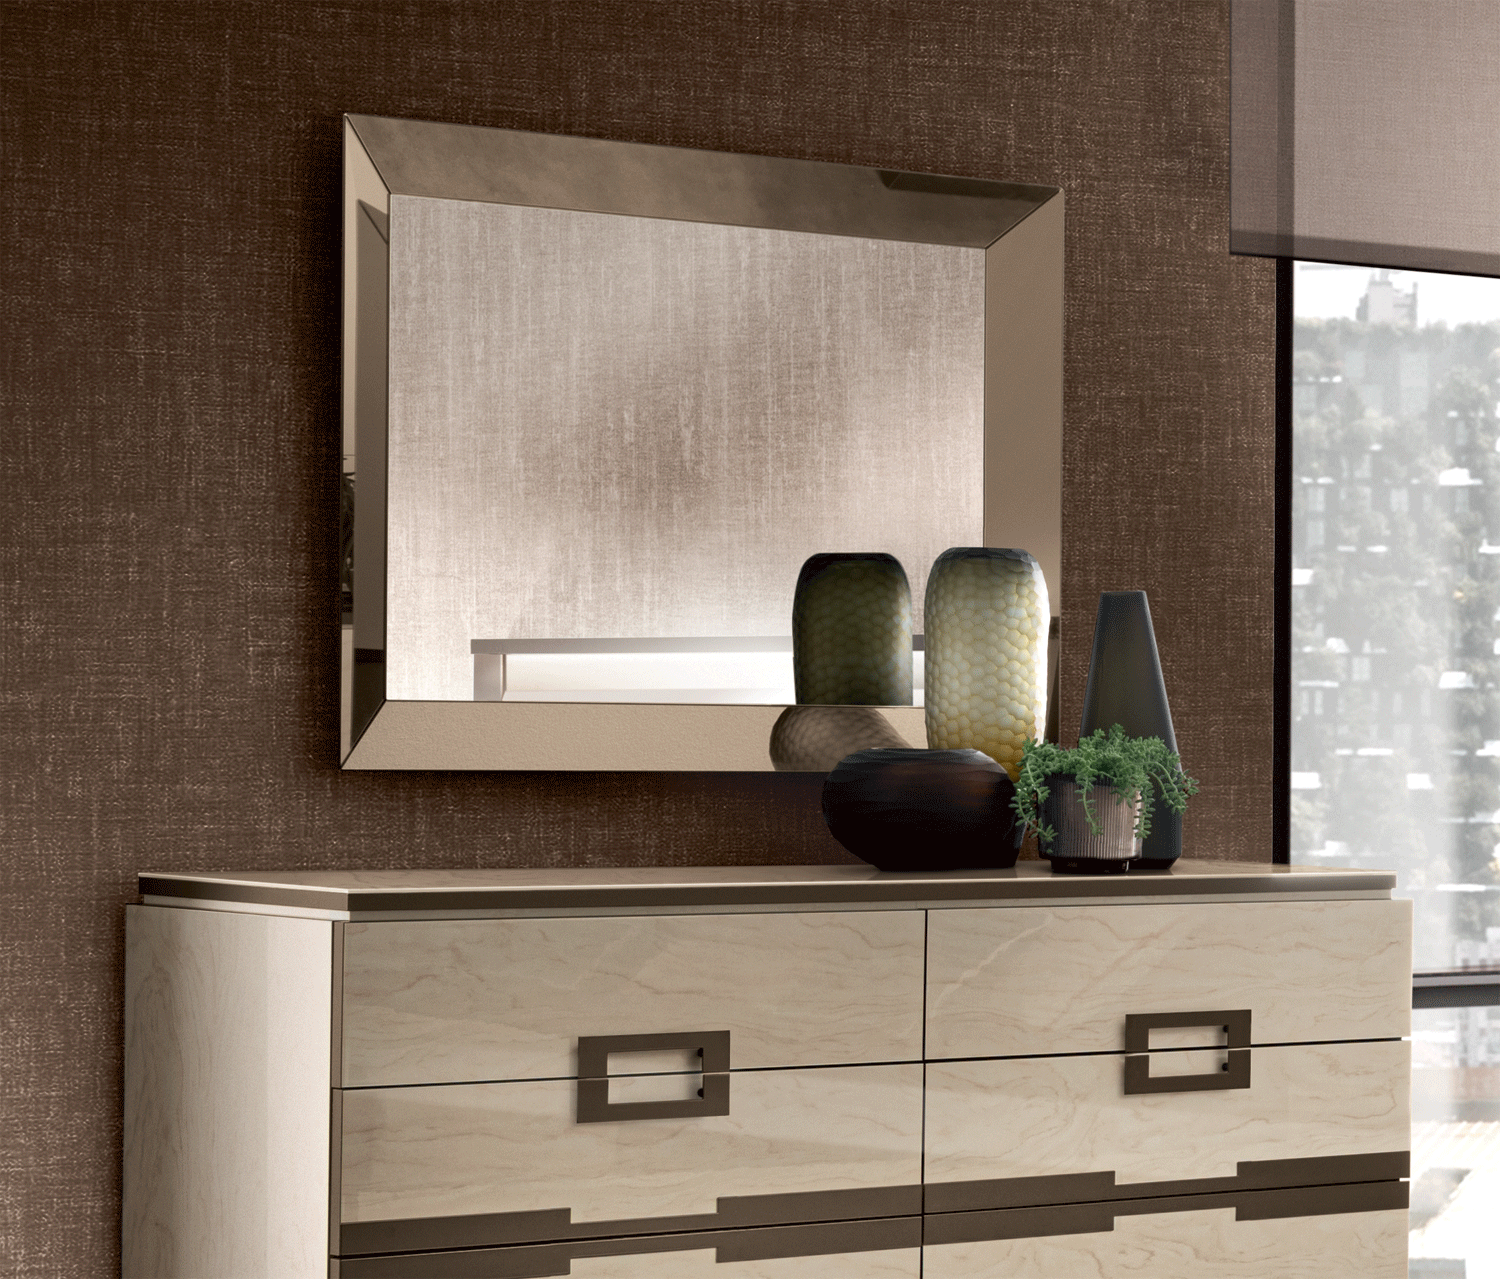 Brands Arredoclassic Dining Room, Italy Poesia mirror for Dressers